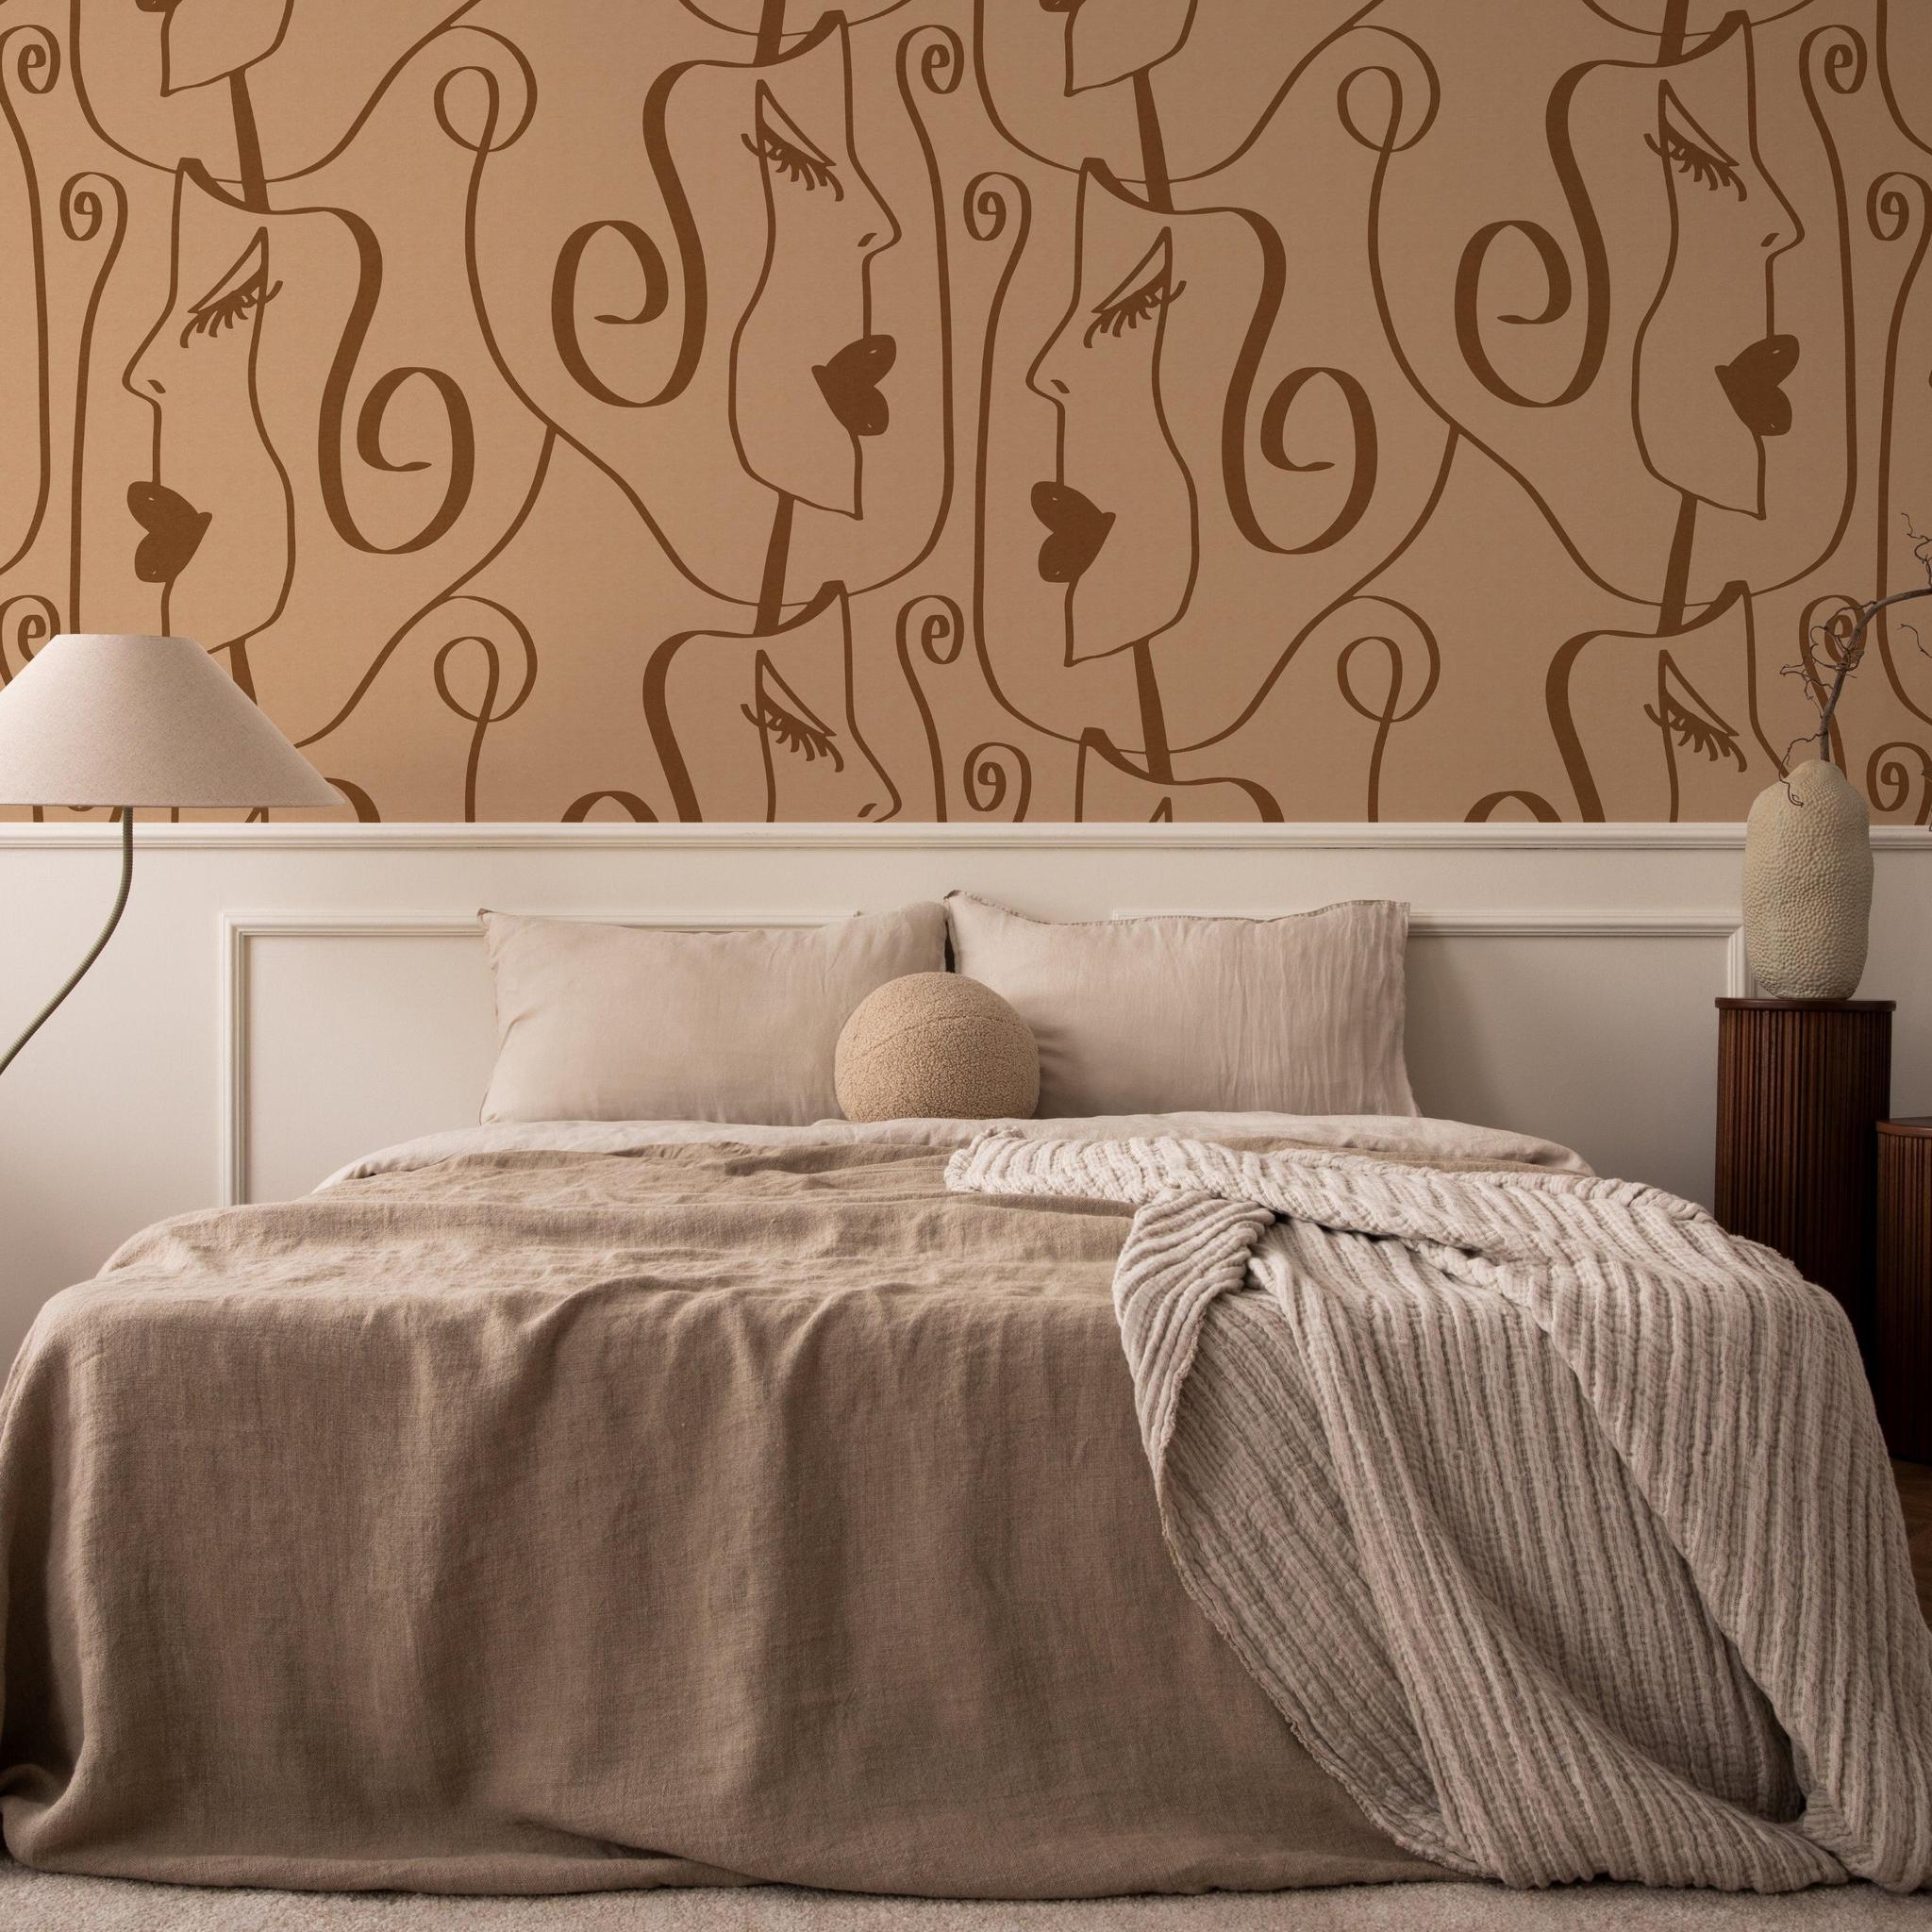 Tess Wallpaper by Wall Blush SG02 featuring artistic face patterns in a modern bedroom setup, emphasizing the wall design.
